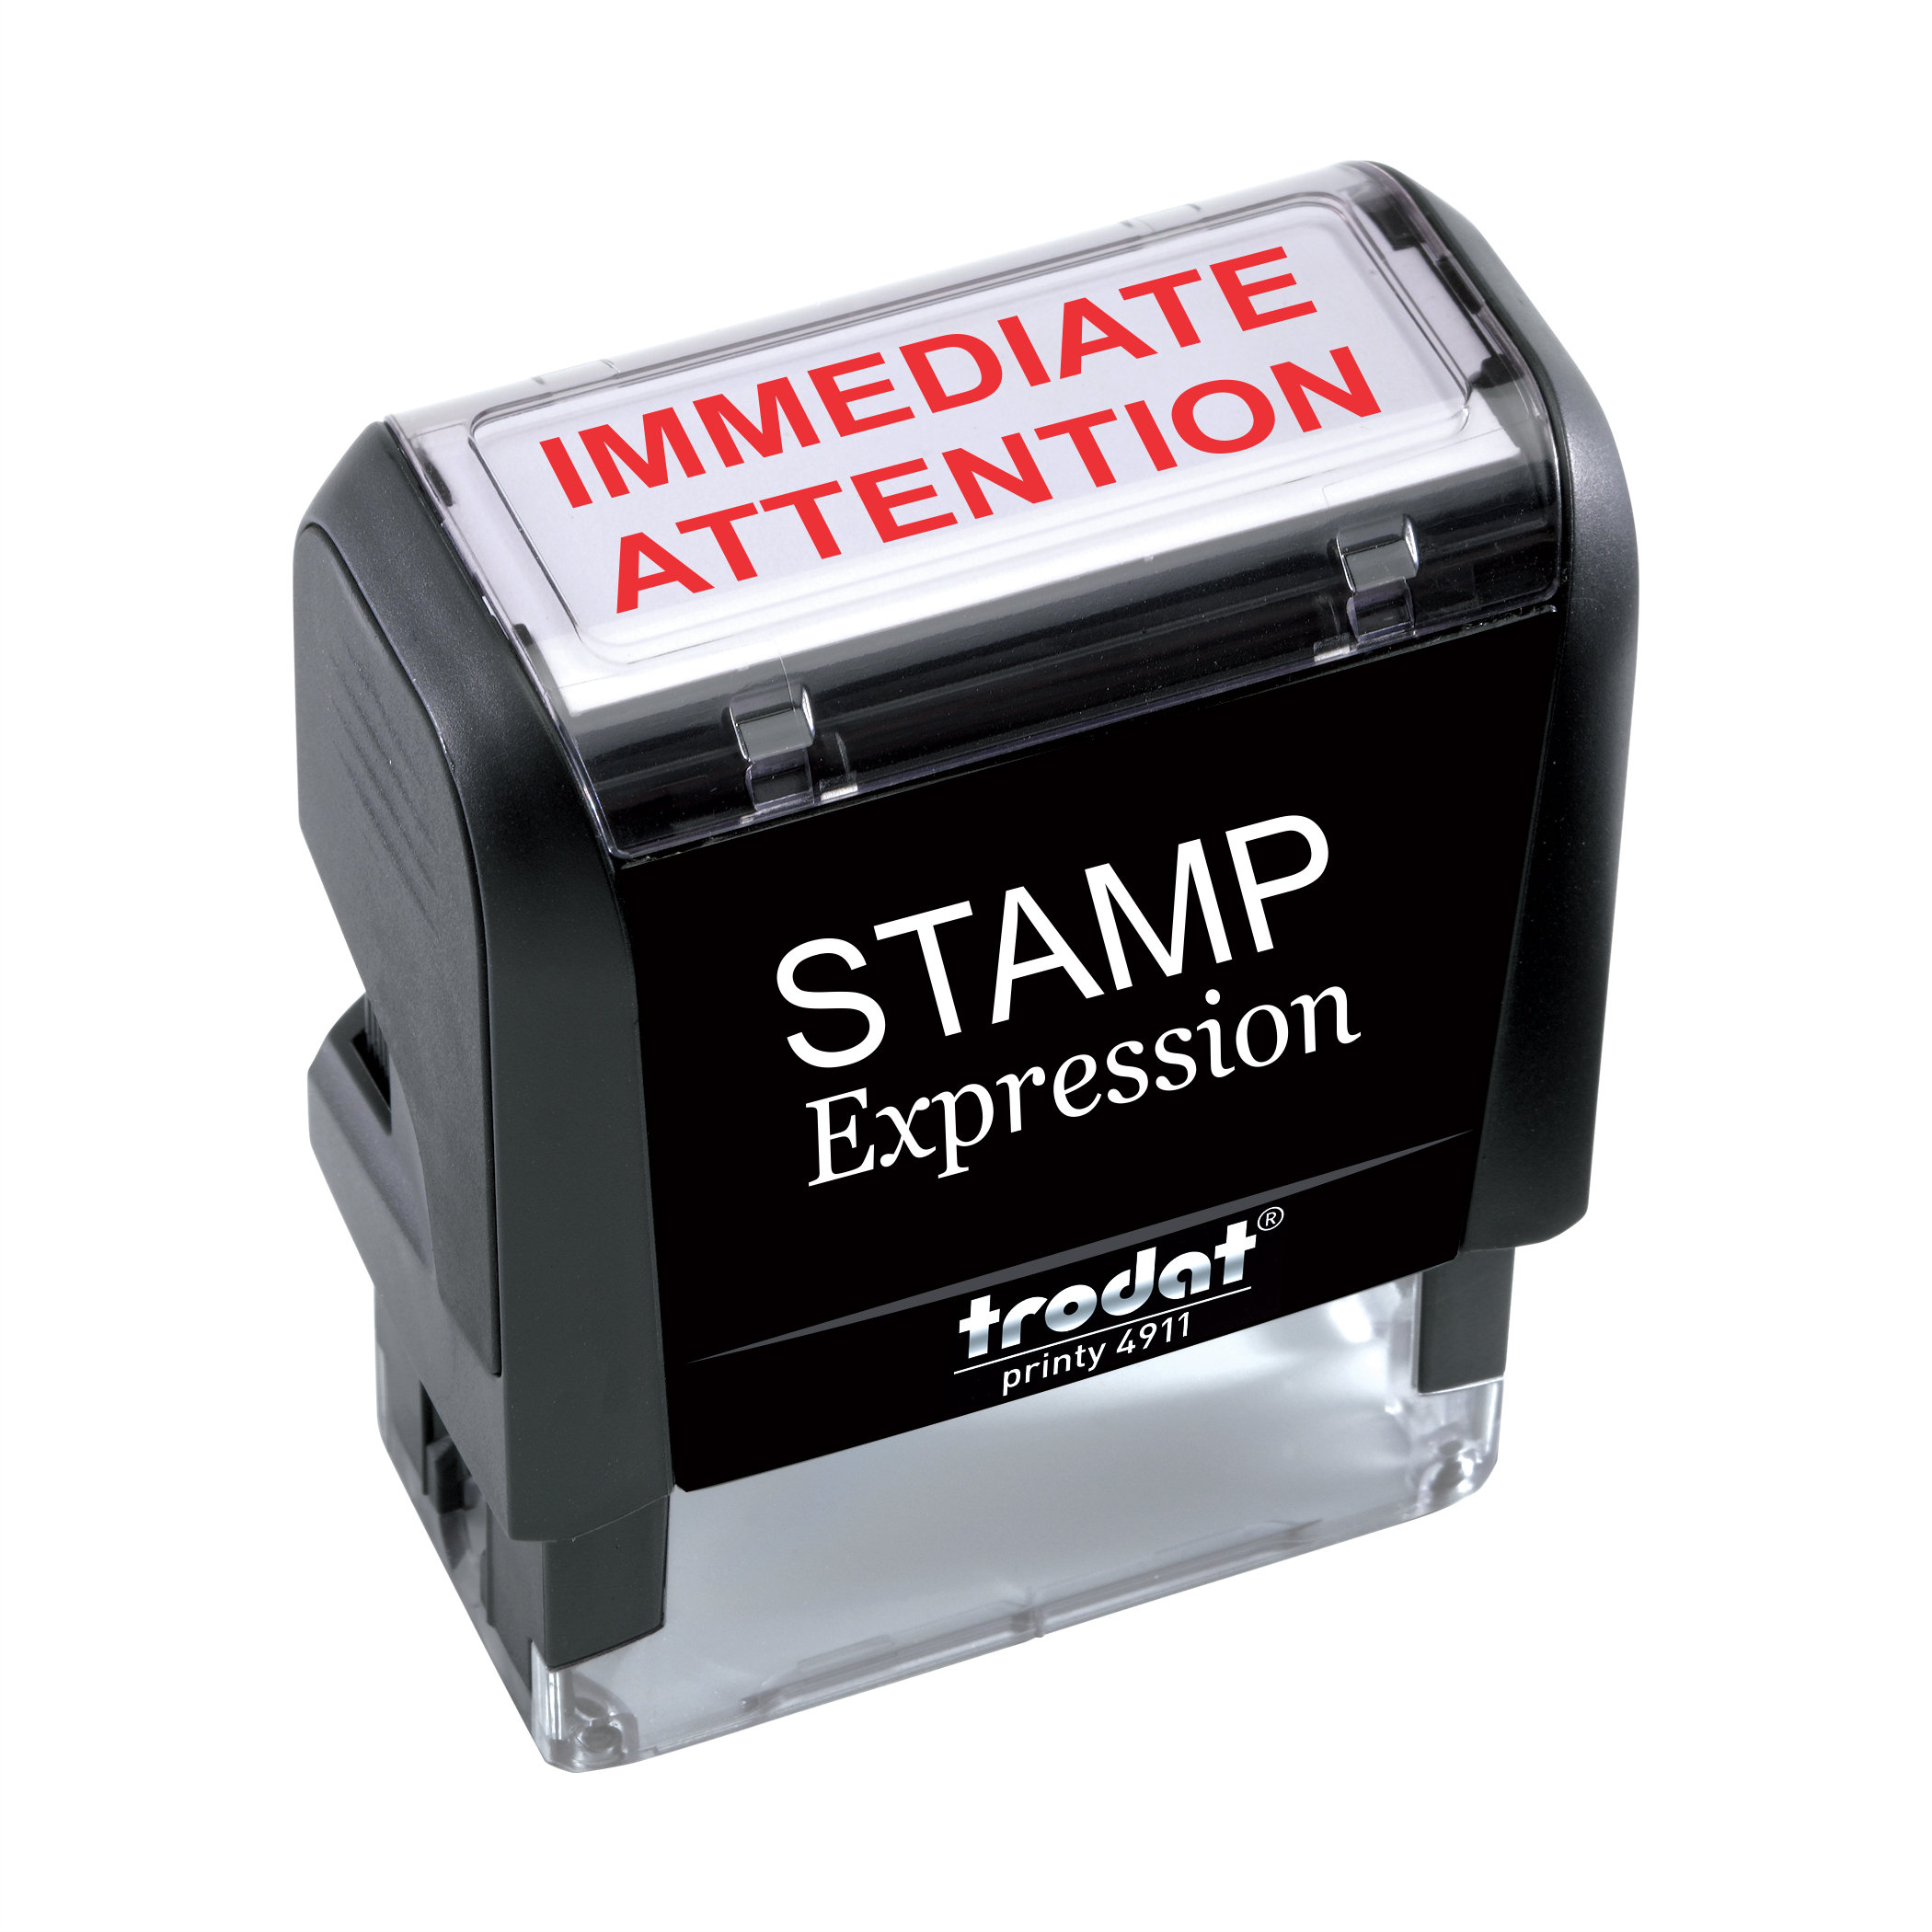 Immediate Attention Office Self Inking Rubber Stamp